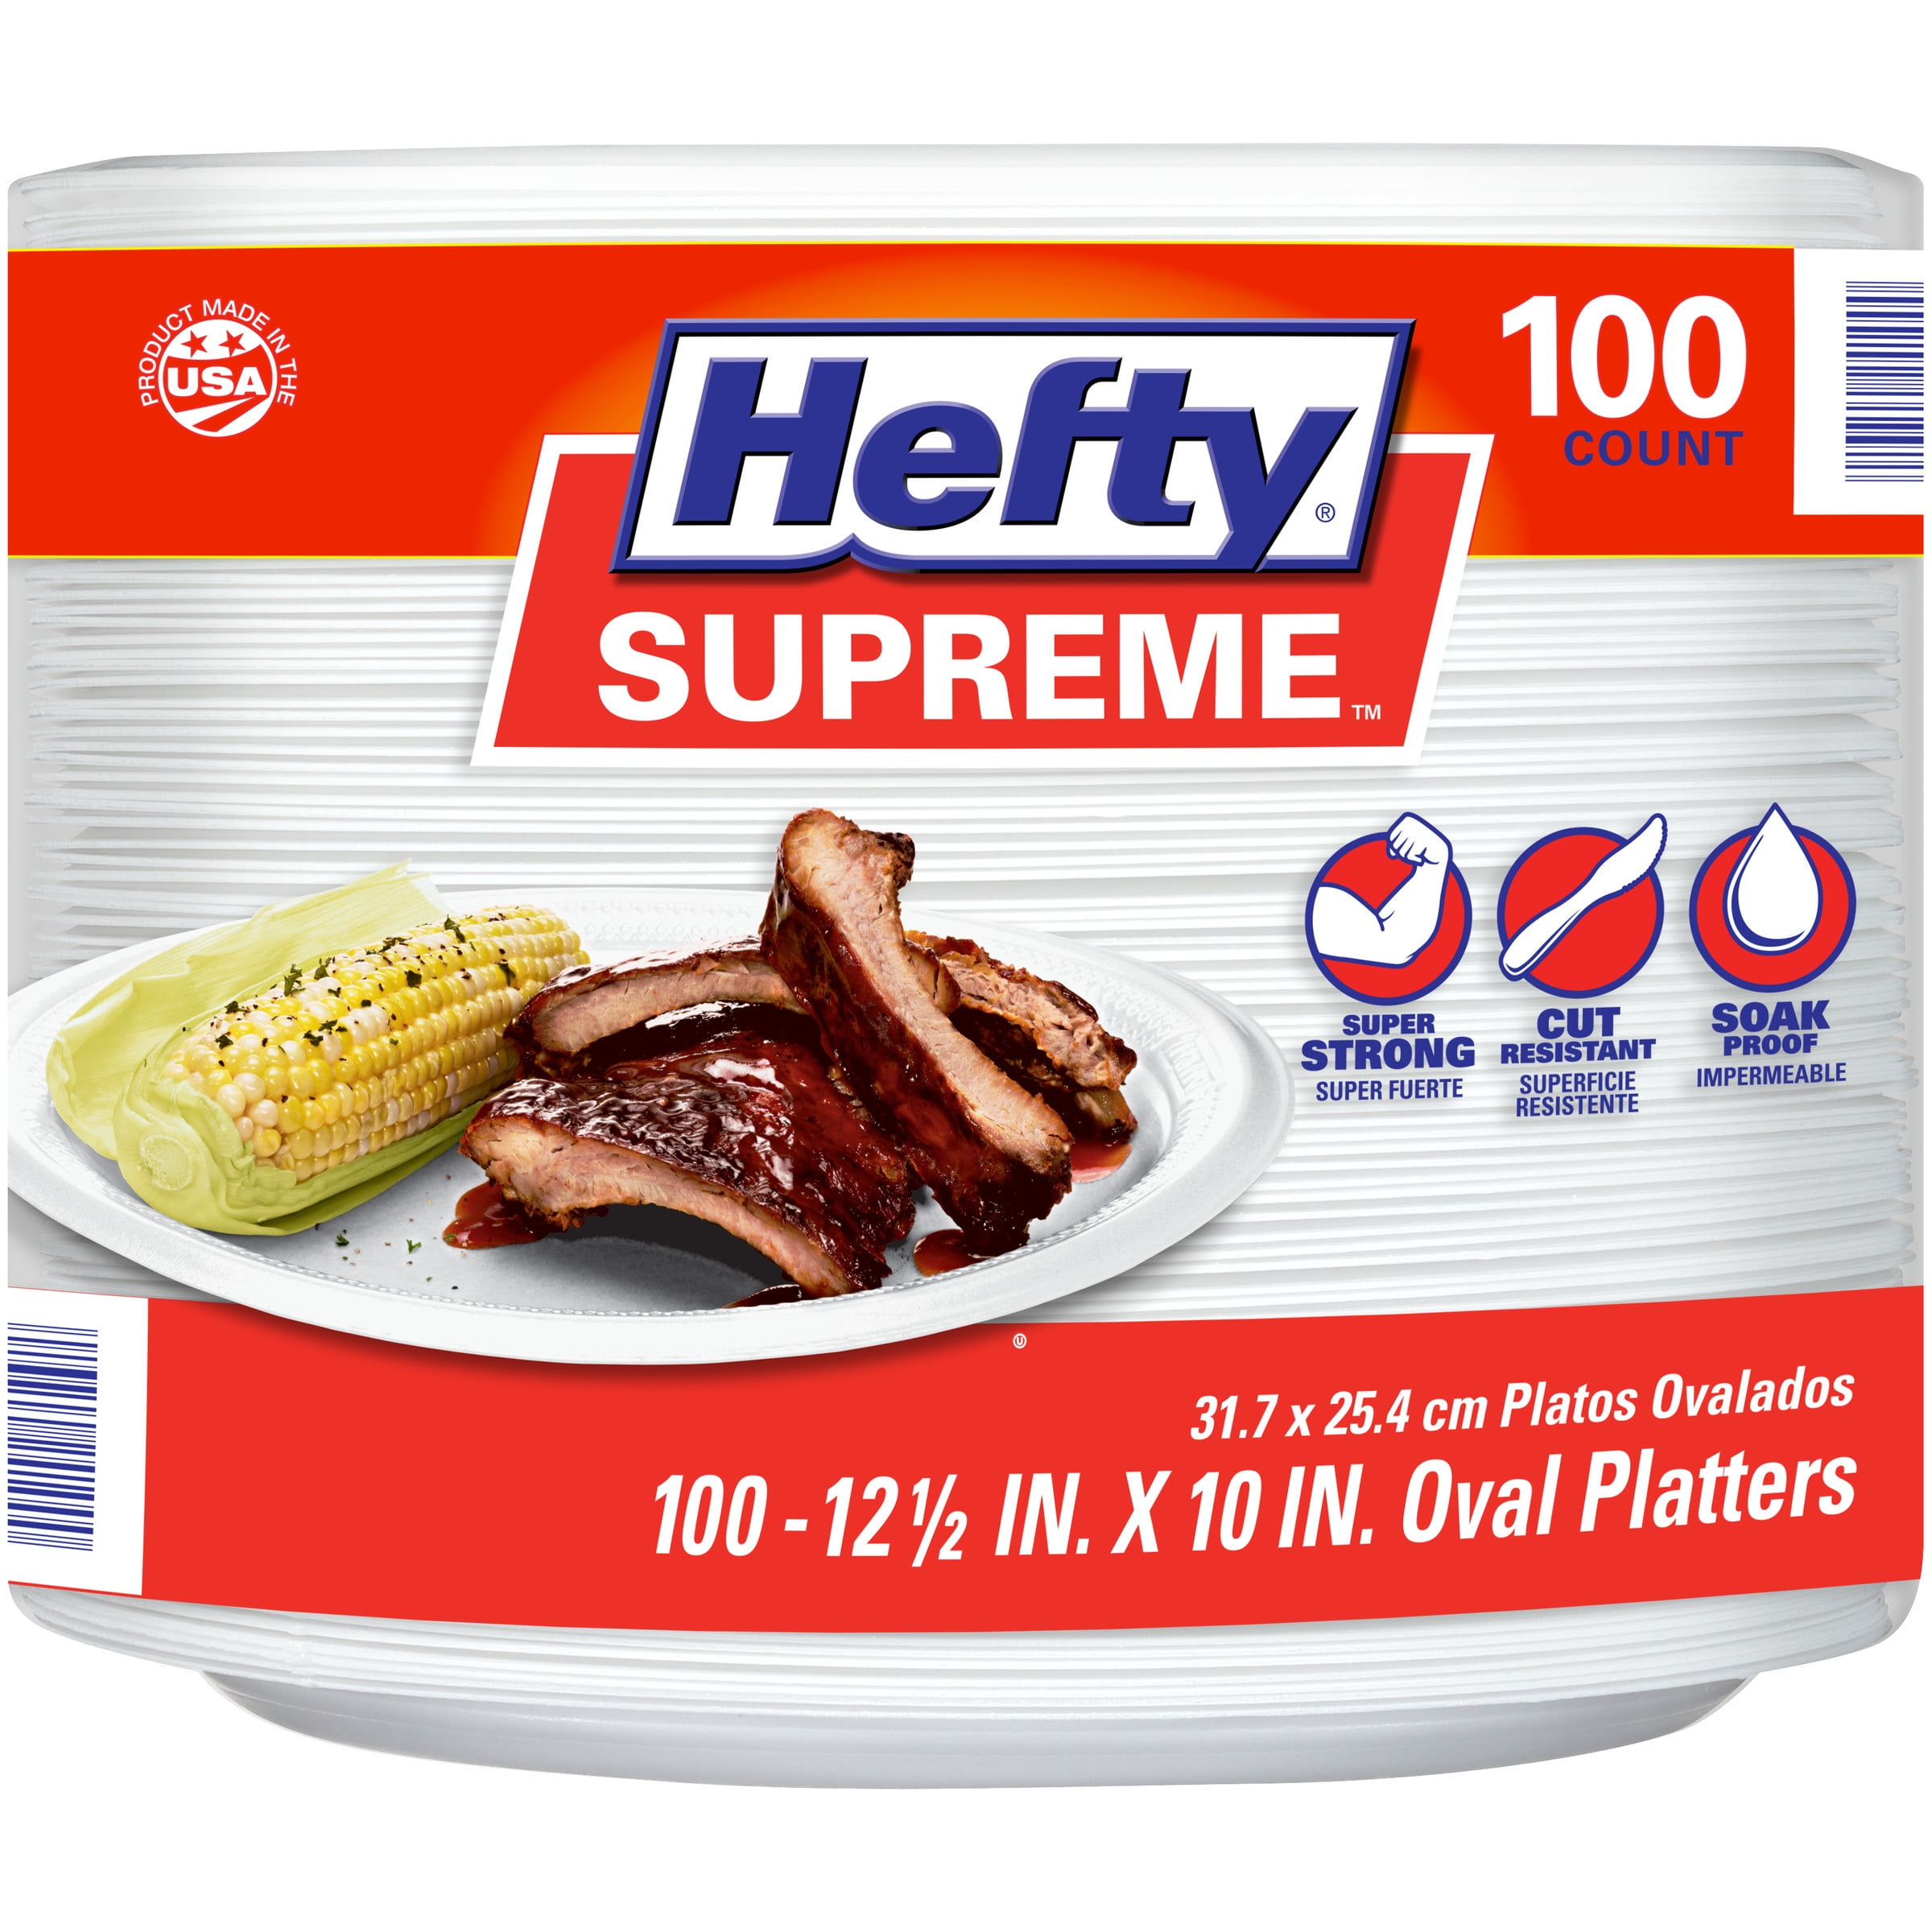 Hefty Supreme Lunch Plates - 250 plates